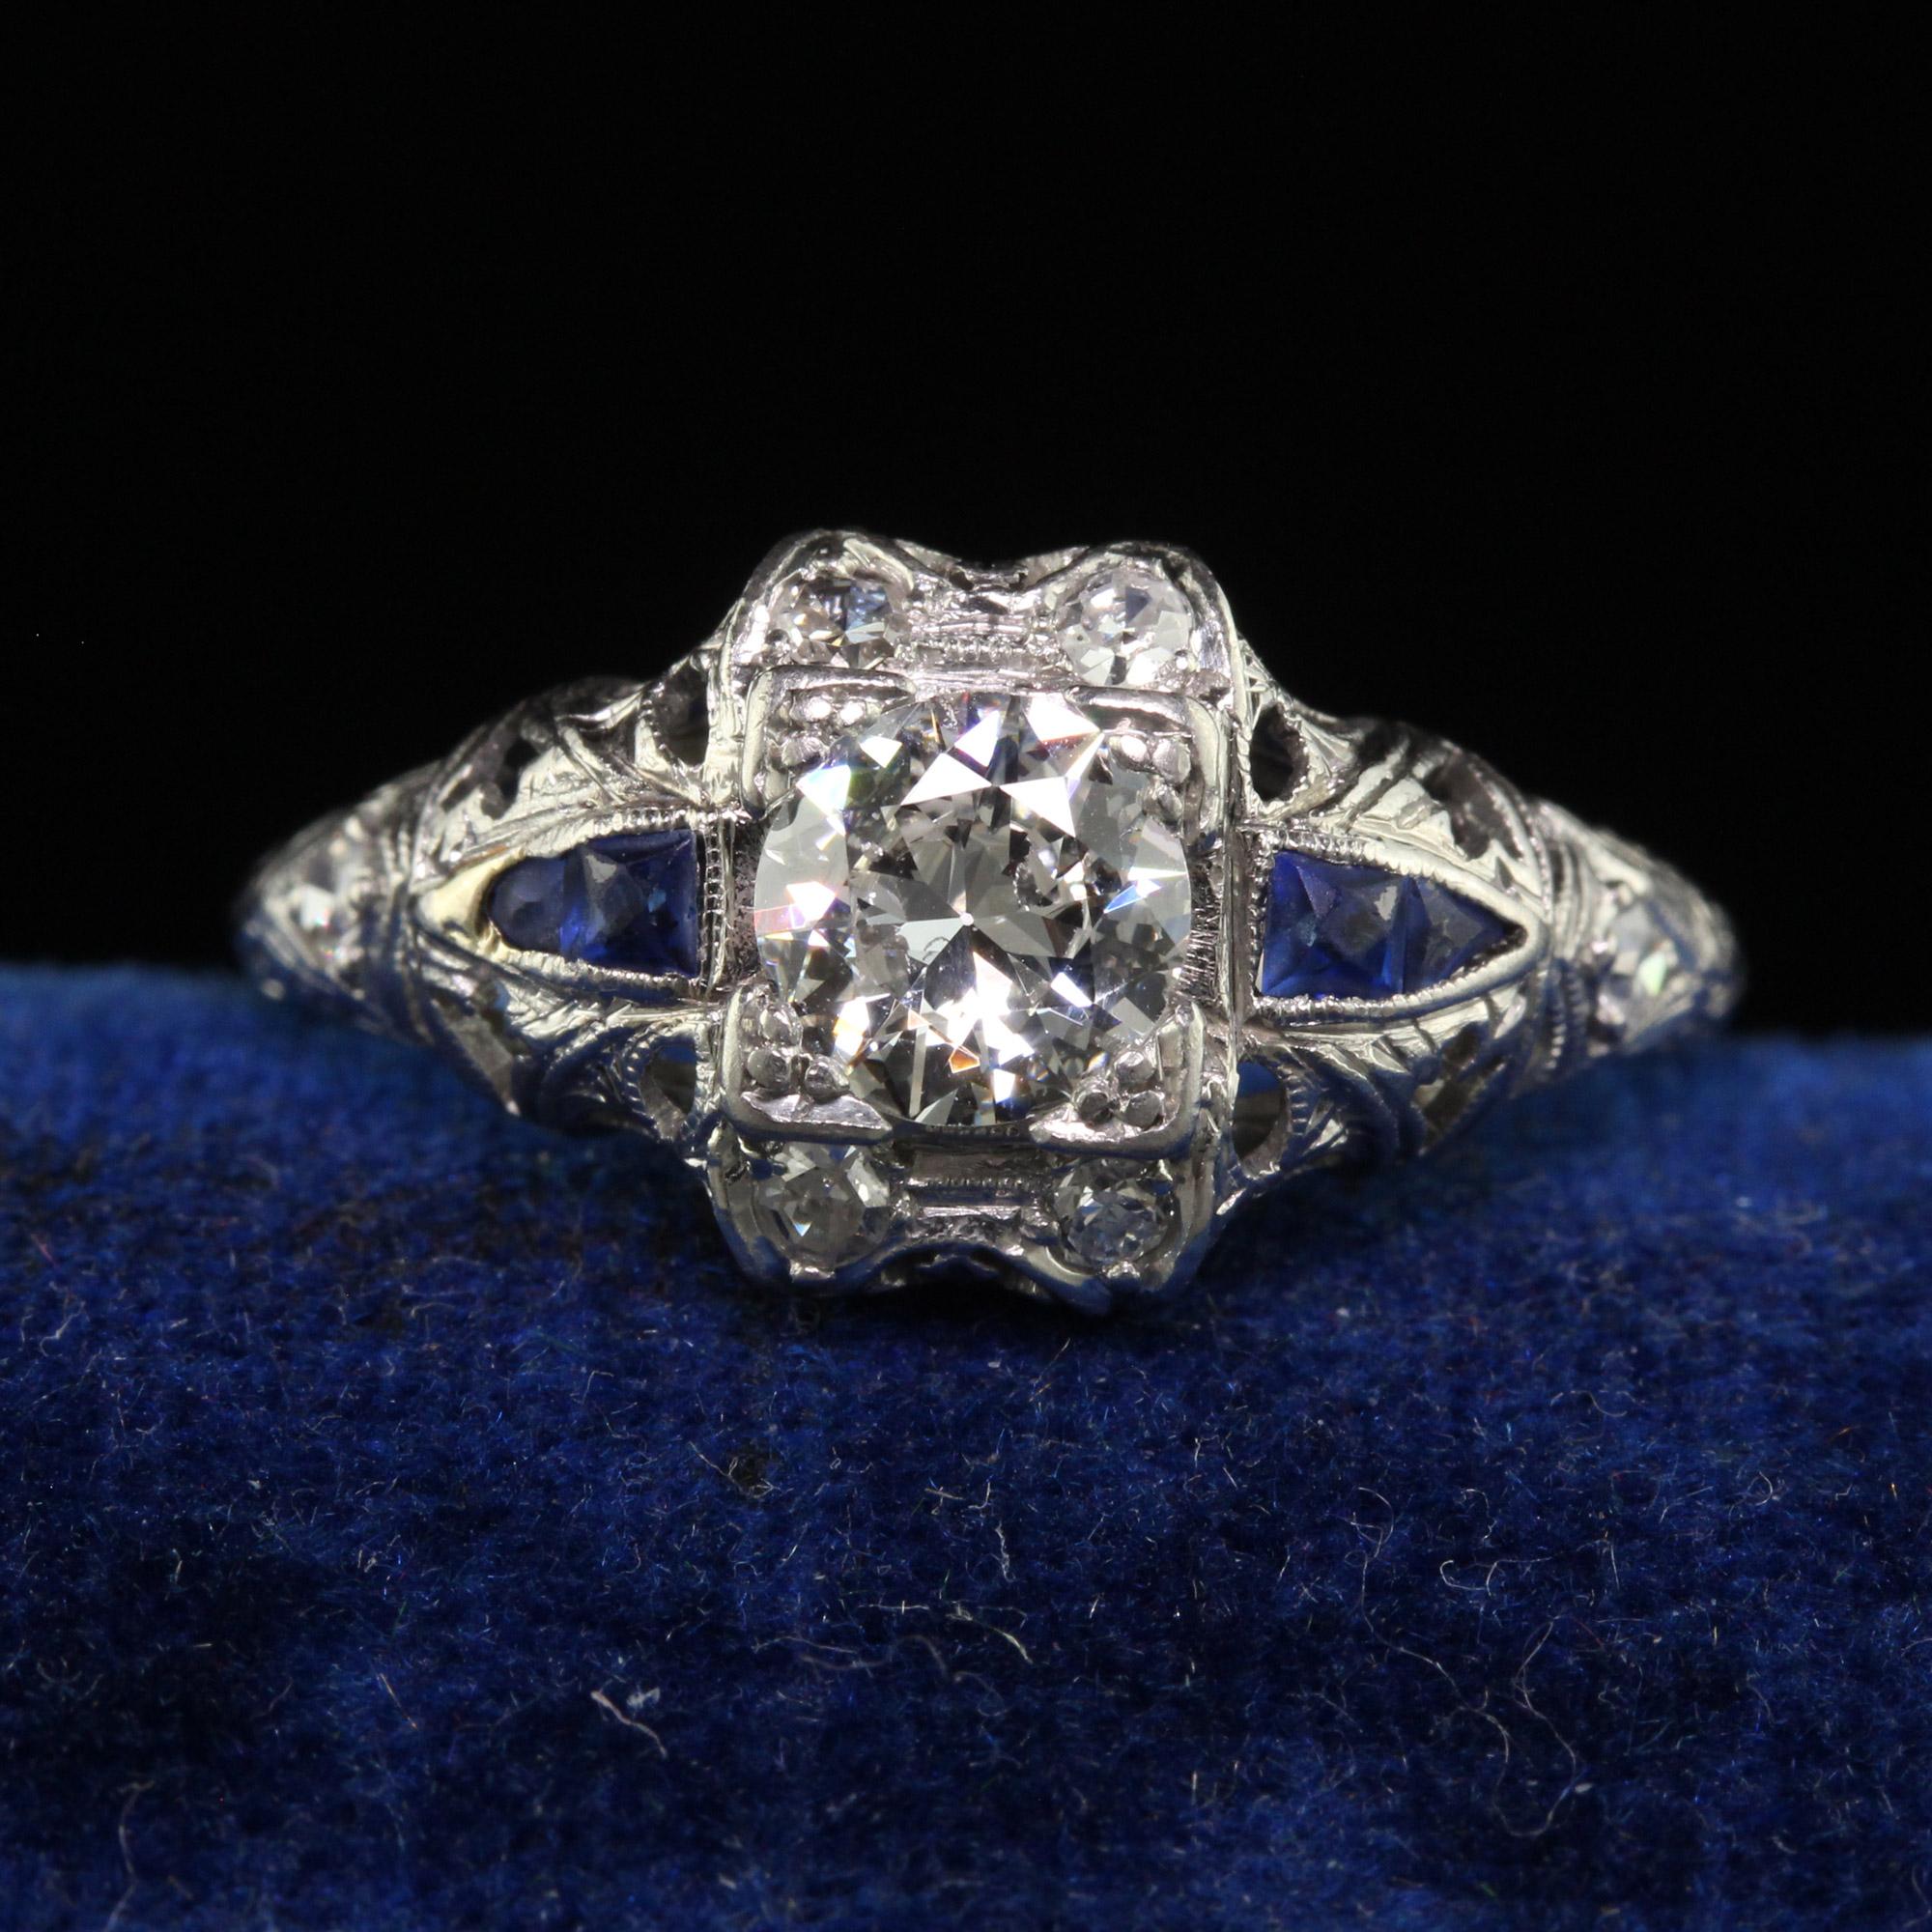 Beautiful Antique Art Deco Platinum Old European Diamond Engagement Ring. This beautiful antique engagement ring is crafted in platinum. The center holds a beautiful white old European cut diamond and it is set in a gorgeous engraved filigree